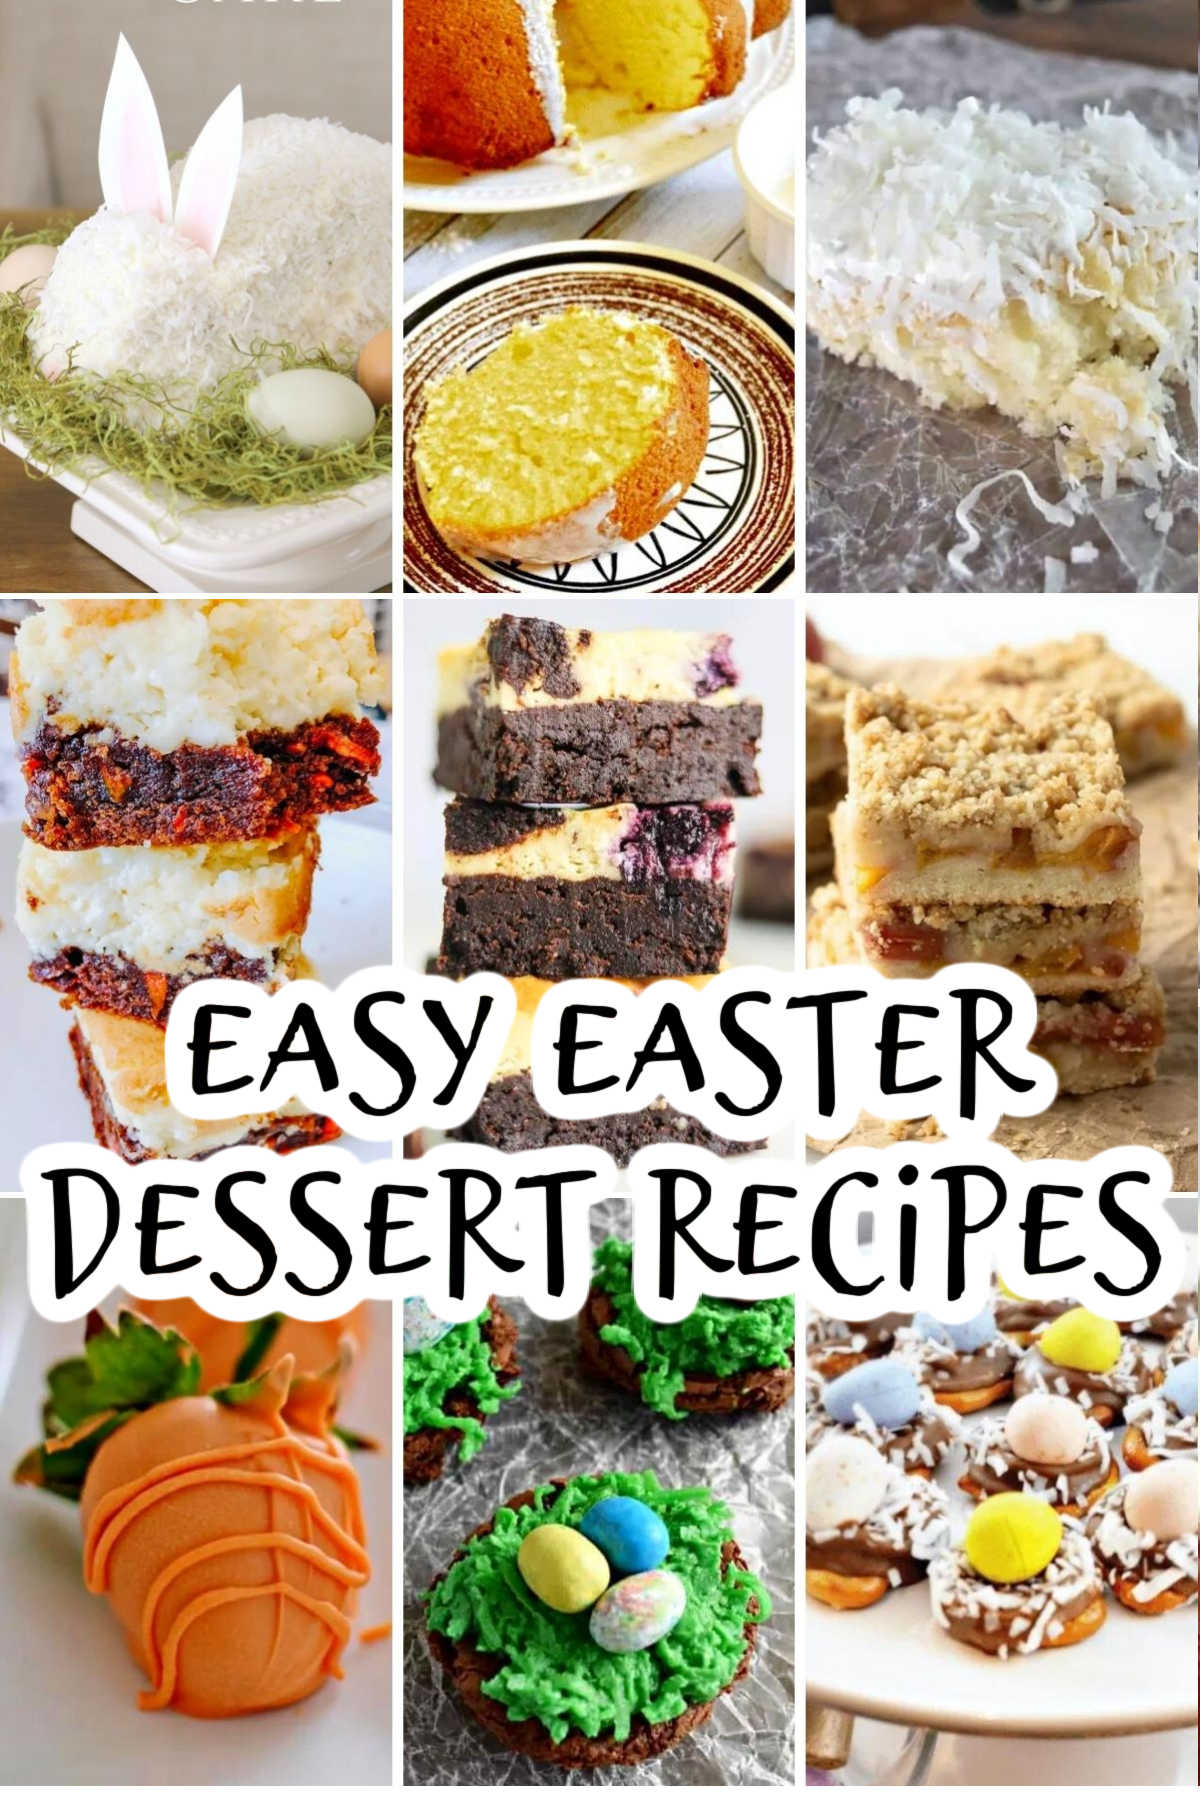 Easy Easter Desserts Recipes Today's Creative Ideas